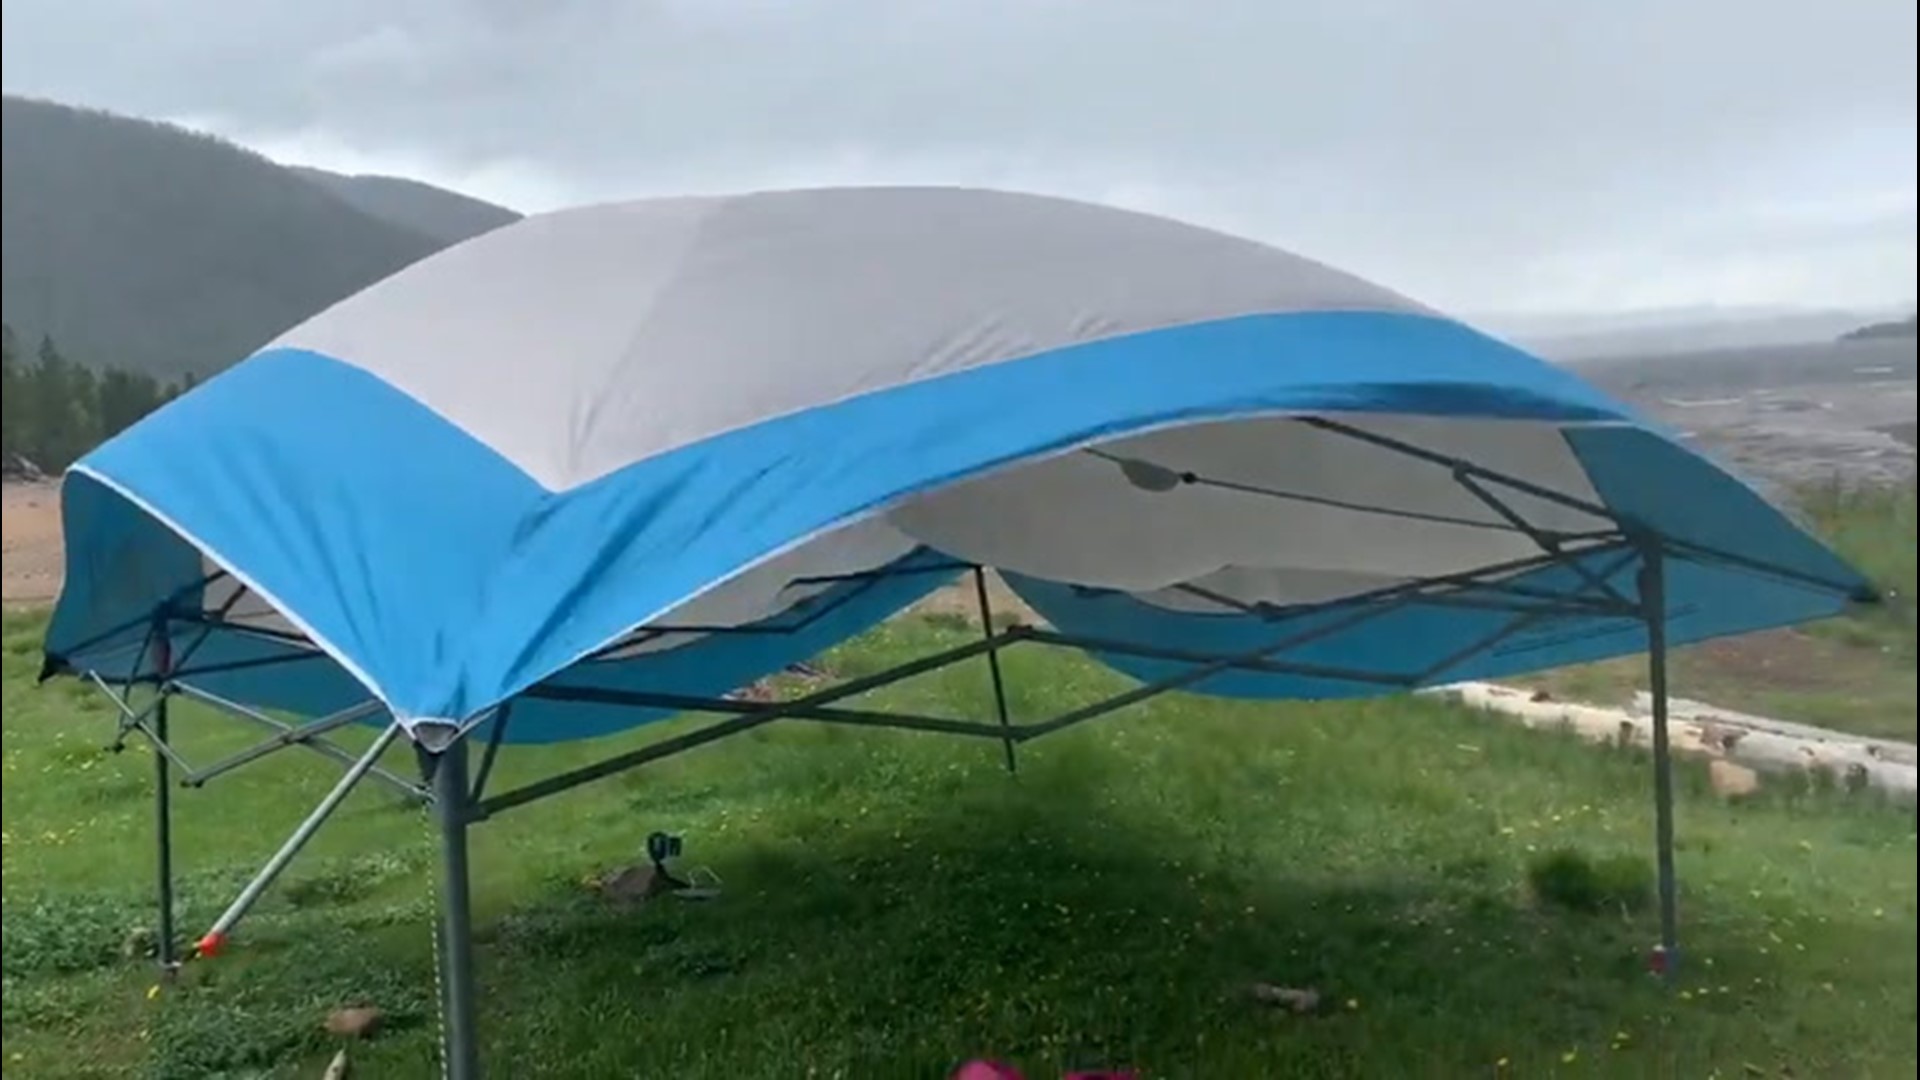 It may be too windy to enjoy the outdoors at this campsite in Granby, Colorado, on June 6. Wind gusts rattled this tent at around 60 mph.